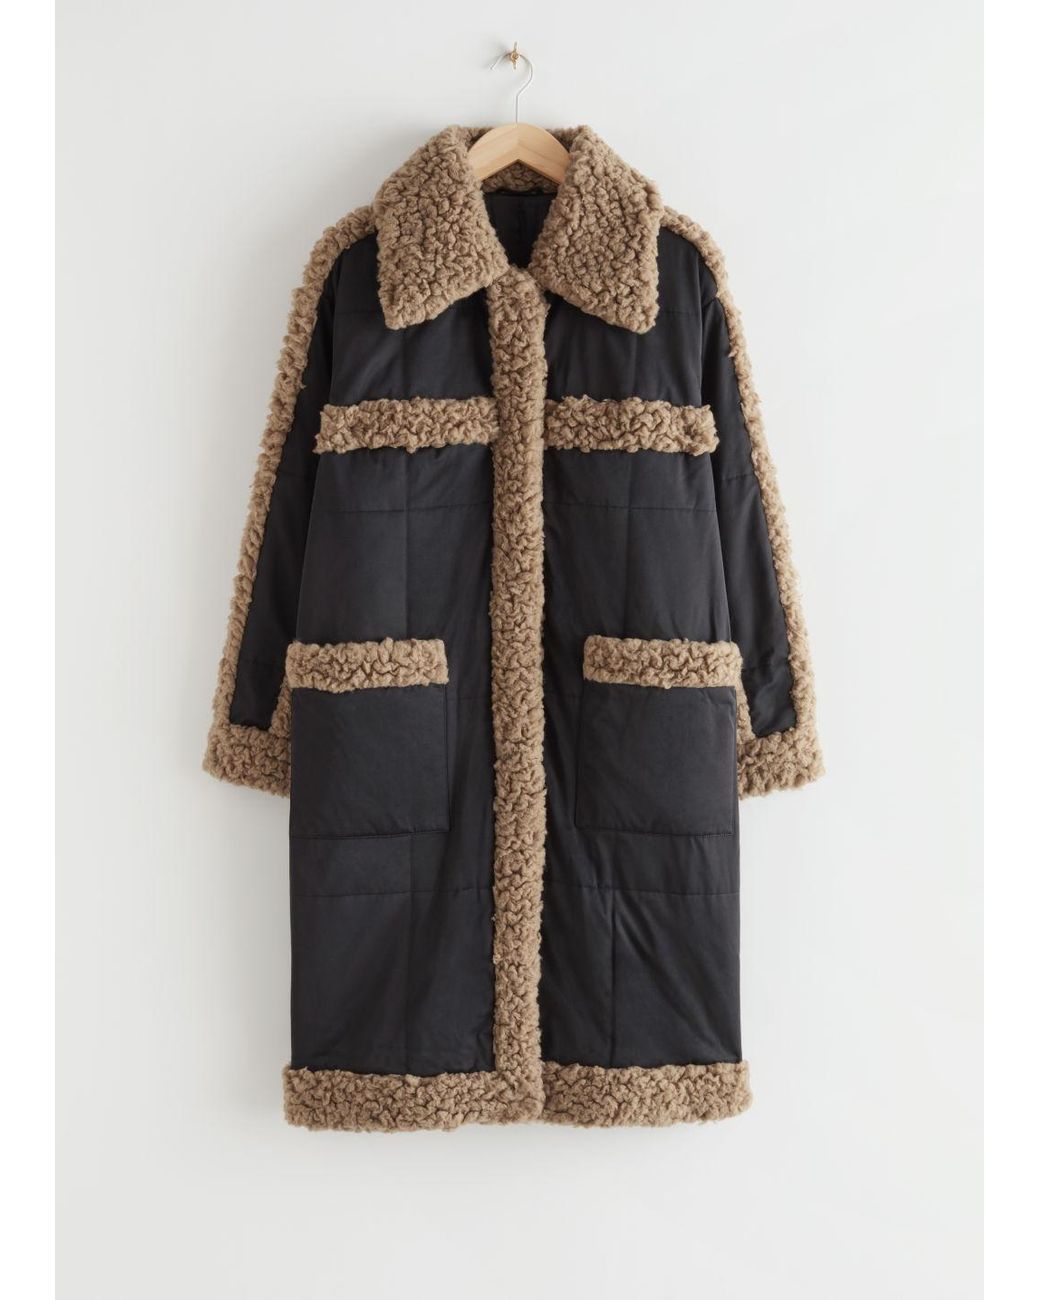 & Other Stories Oversized Faux Shearling Puffer Coat in Black | Lyst